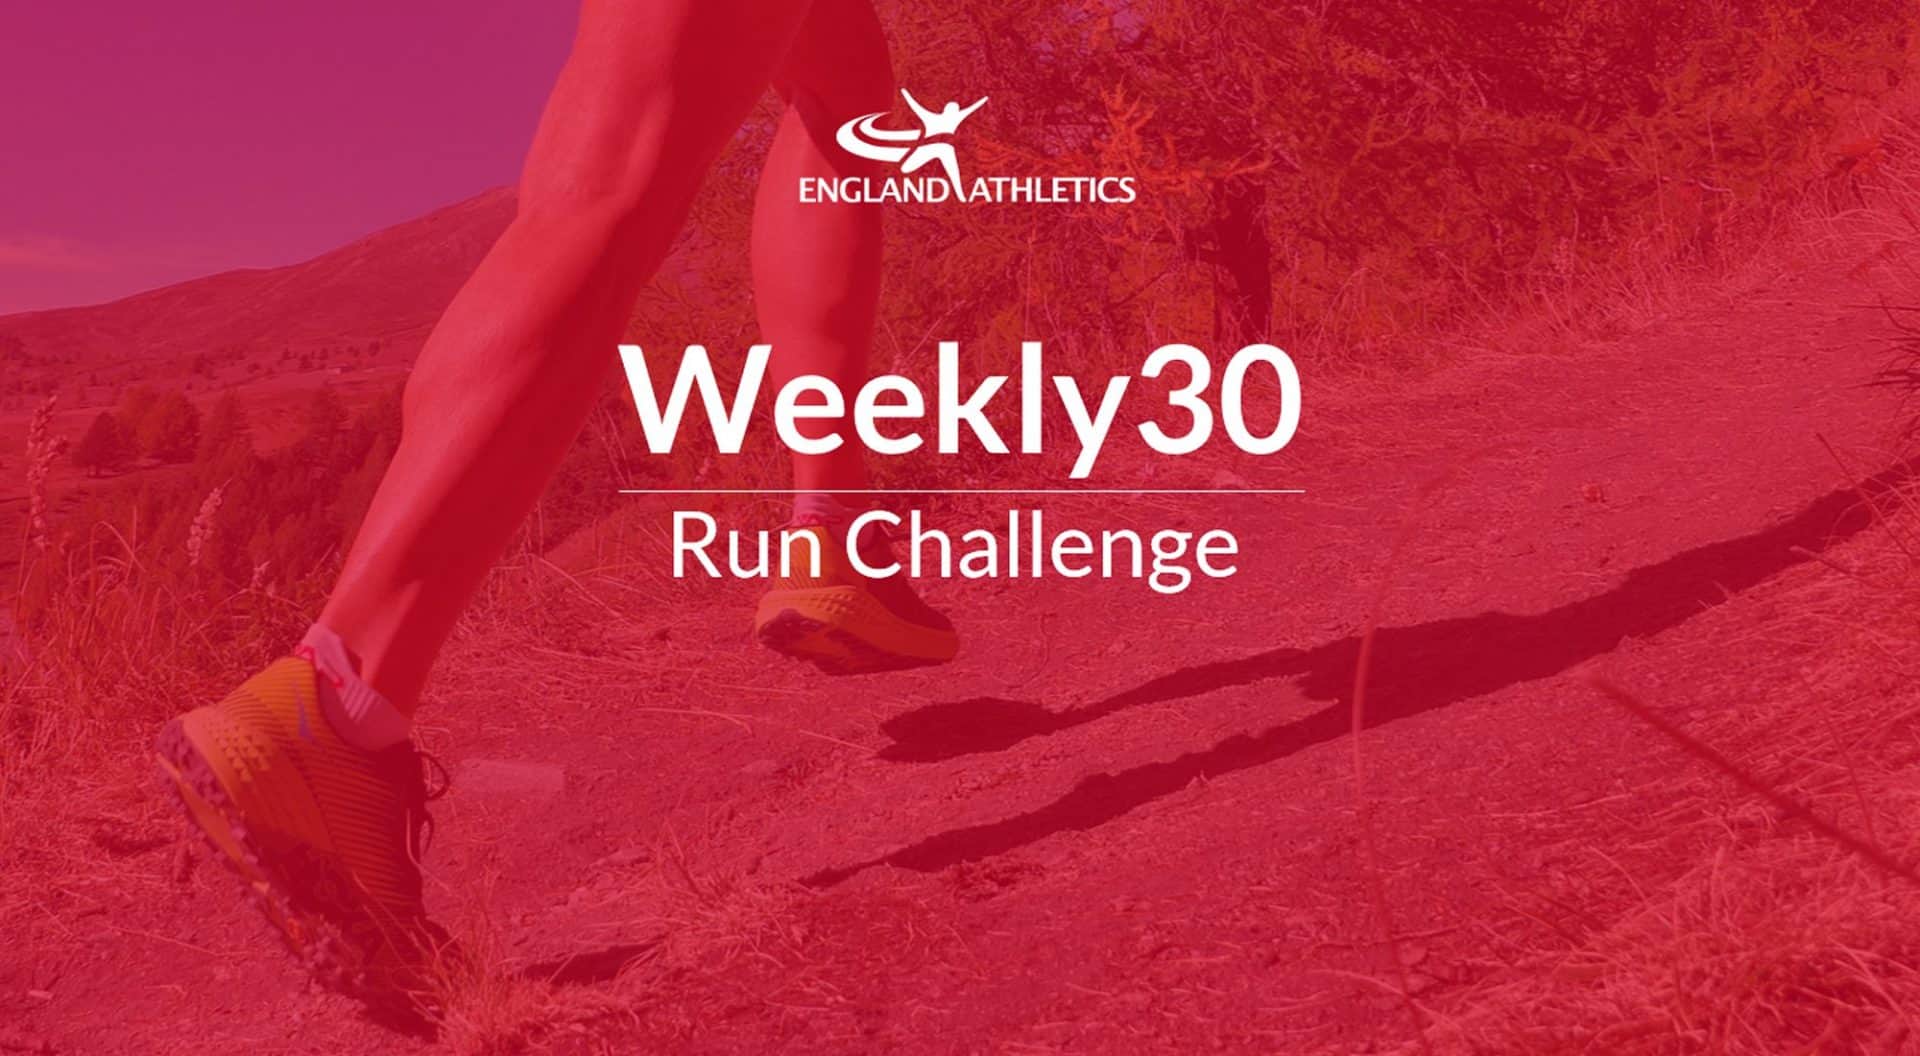 Lace up for the Weekly30 Run Challenge